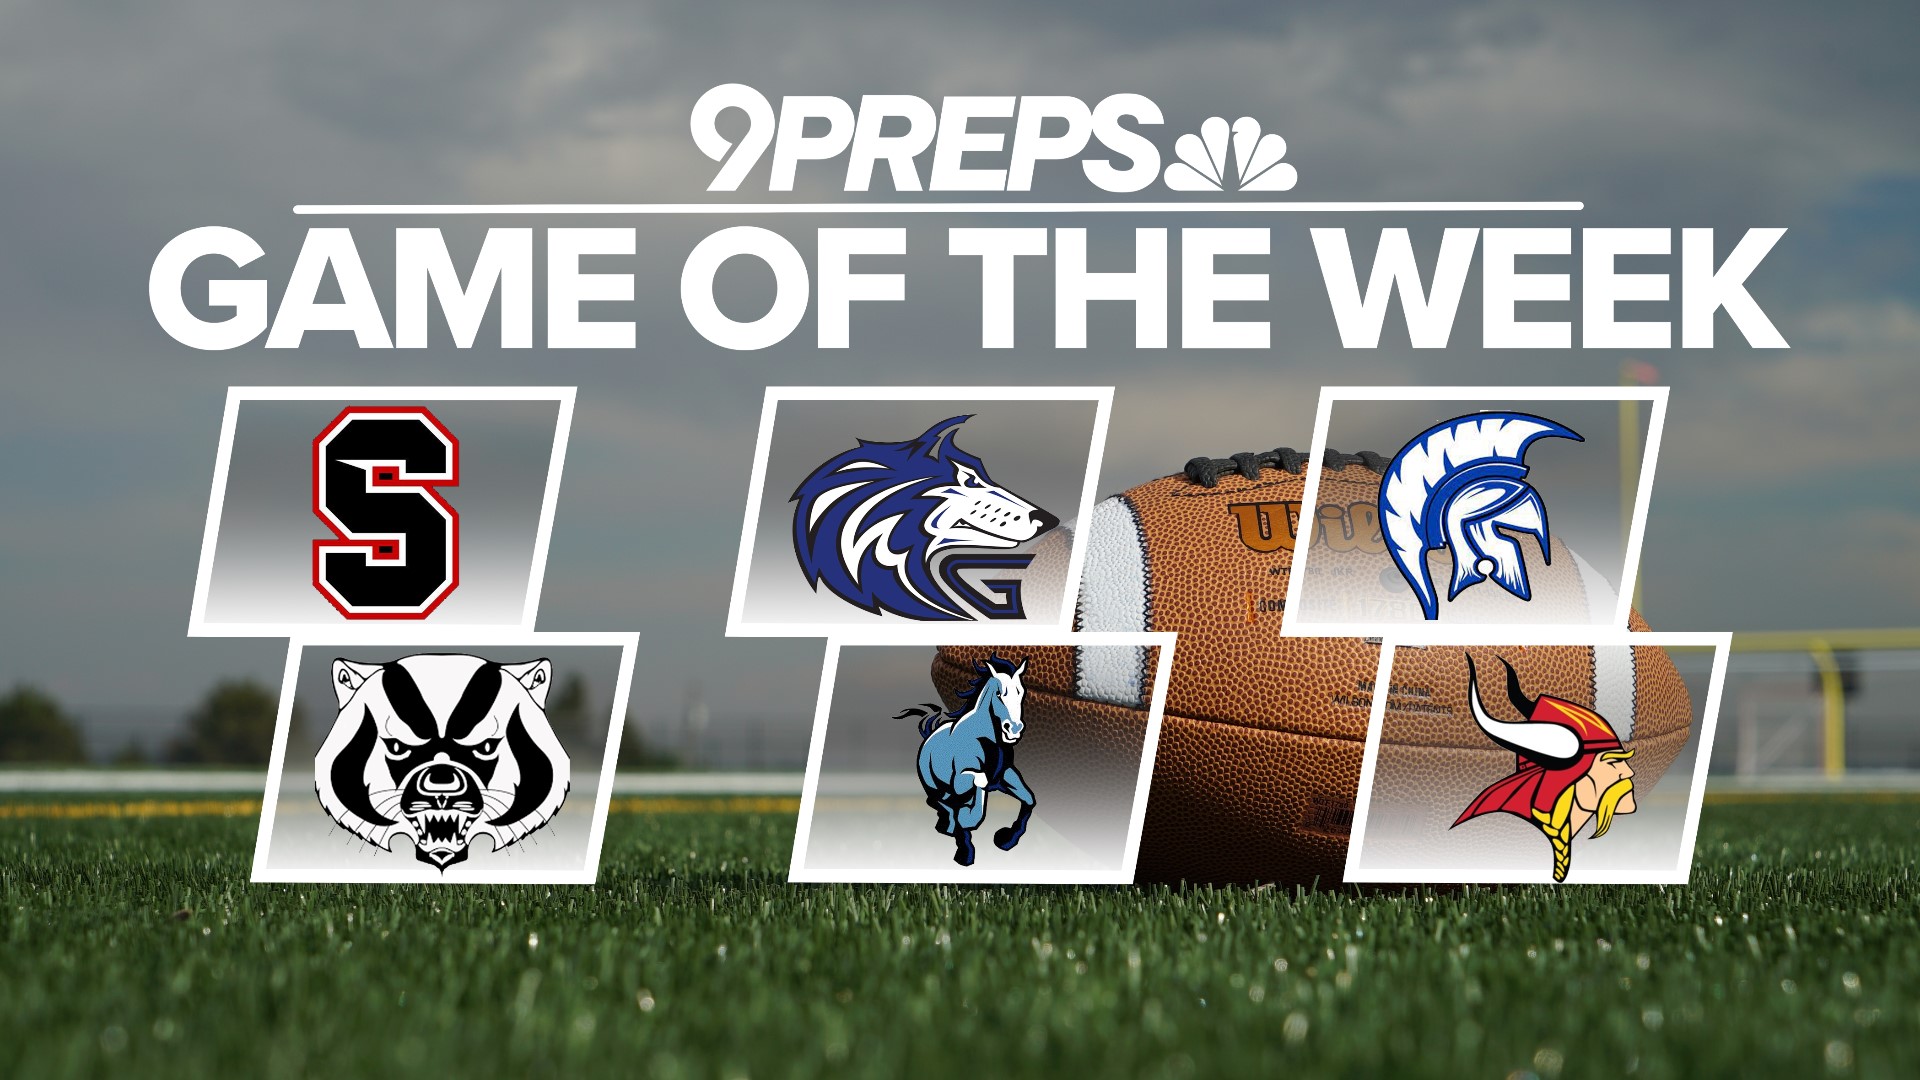 The 9Preps Game of the Week rolls on! Vote to determine which high school football game we showcase on Friday, Sept. 8.